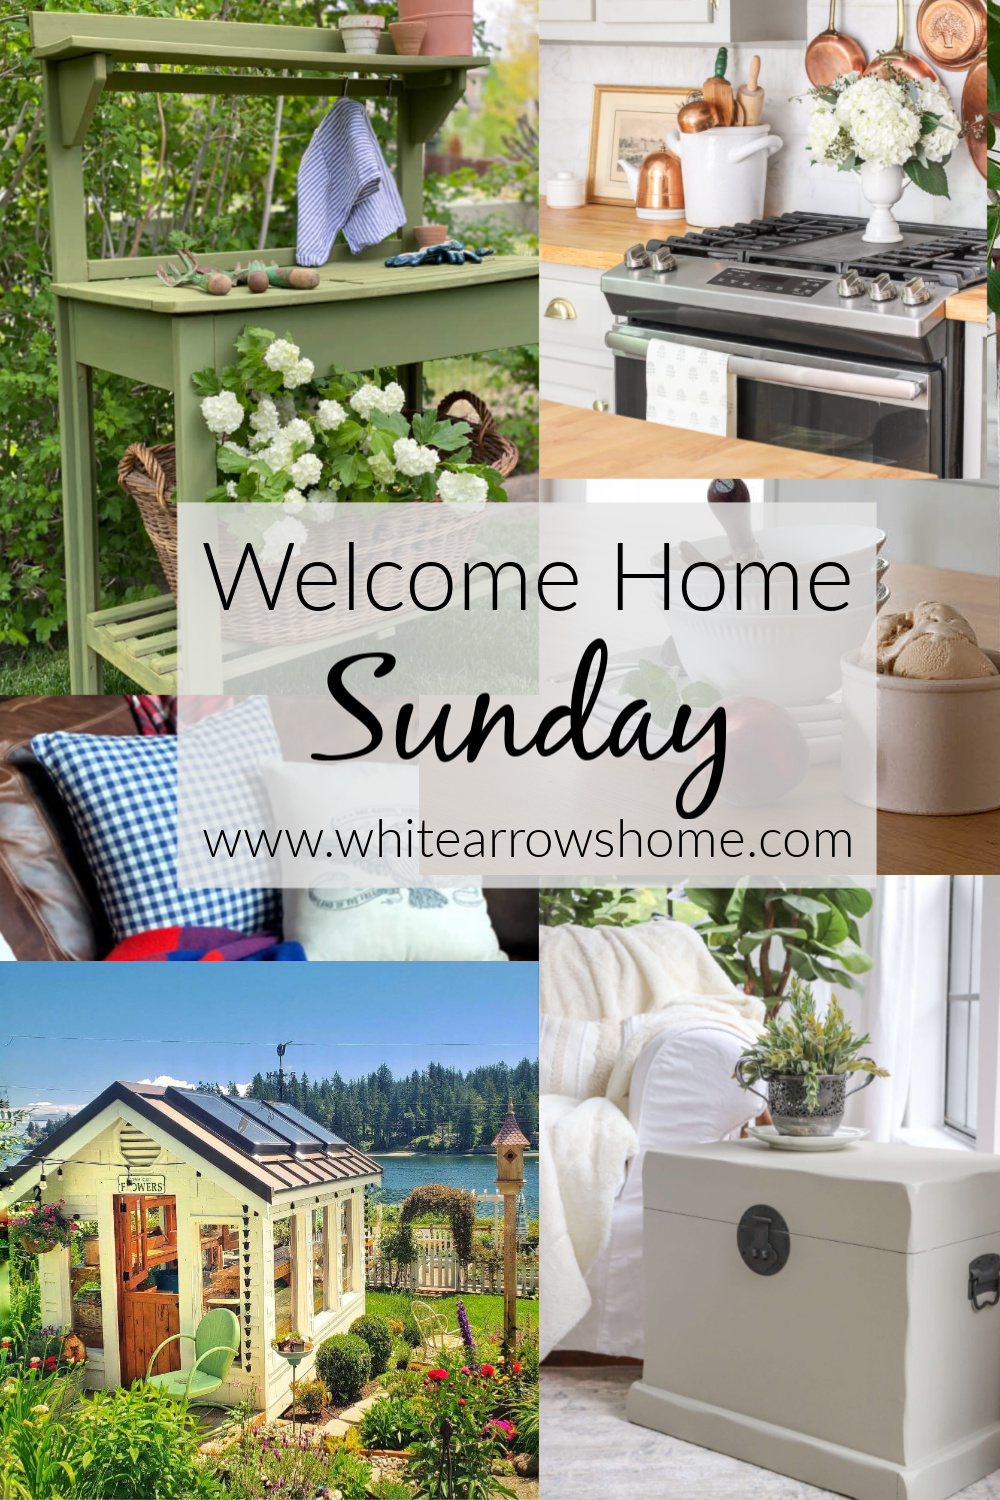 https://whitearrowshome.com/wp-content/uploads/2020/06/Welcome-Home-Sunday-June-14.jpg